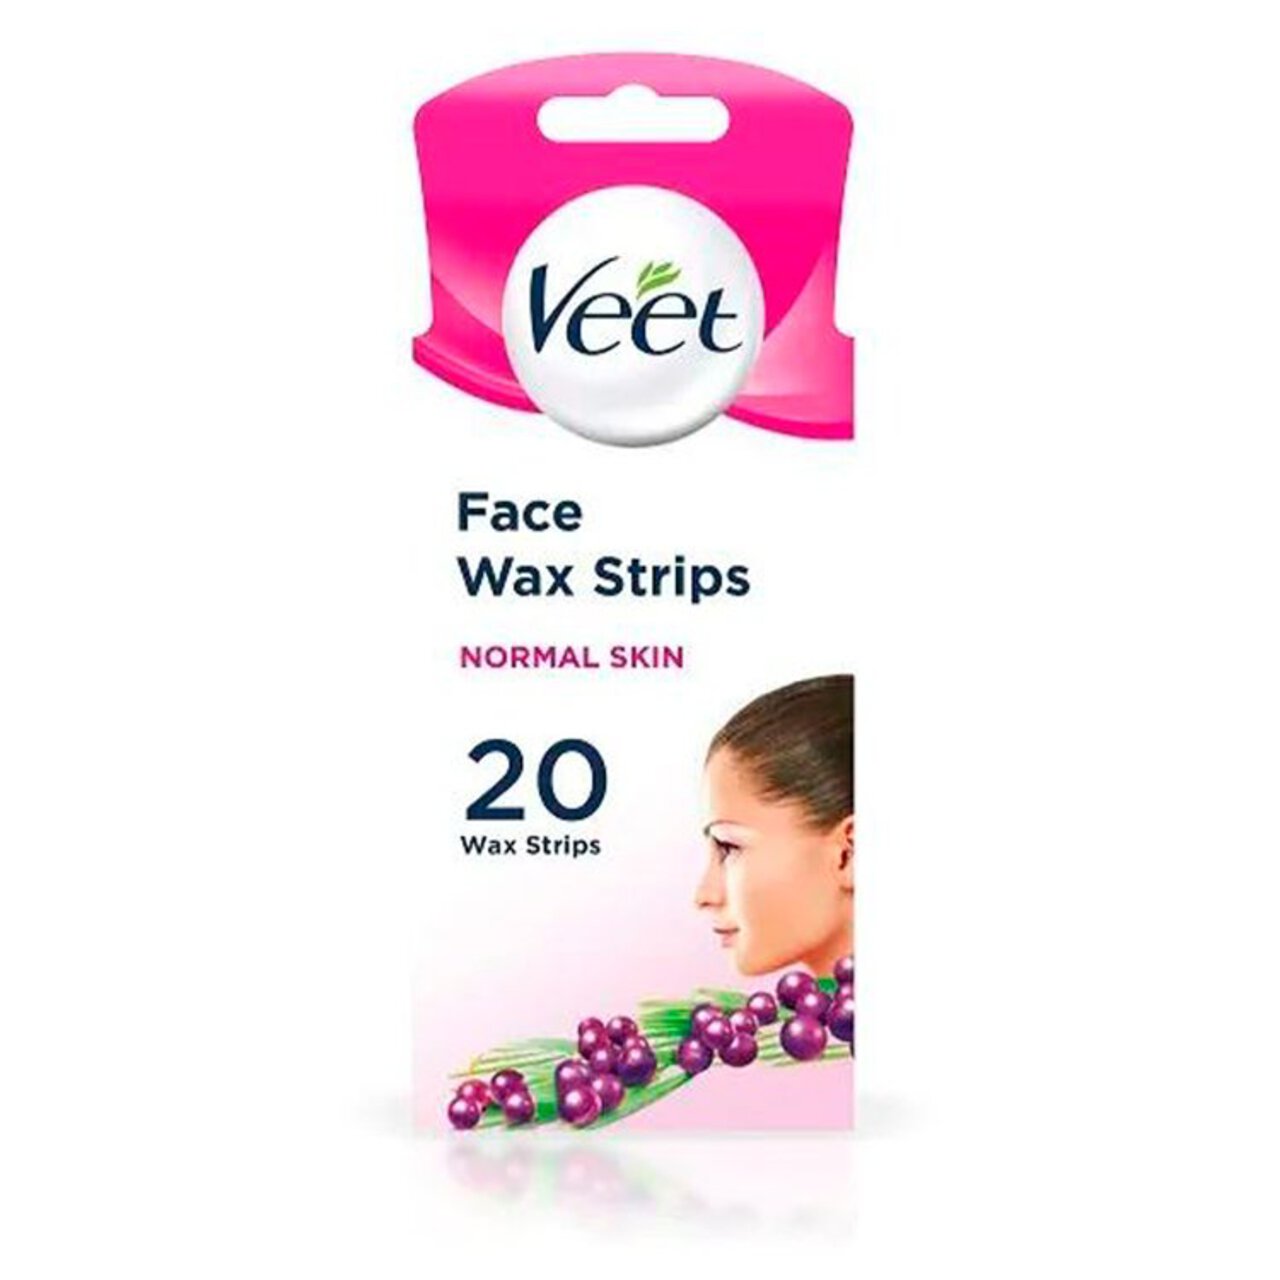 Veet Wax Strips Face for Normal Skin 20 per pack